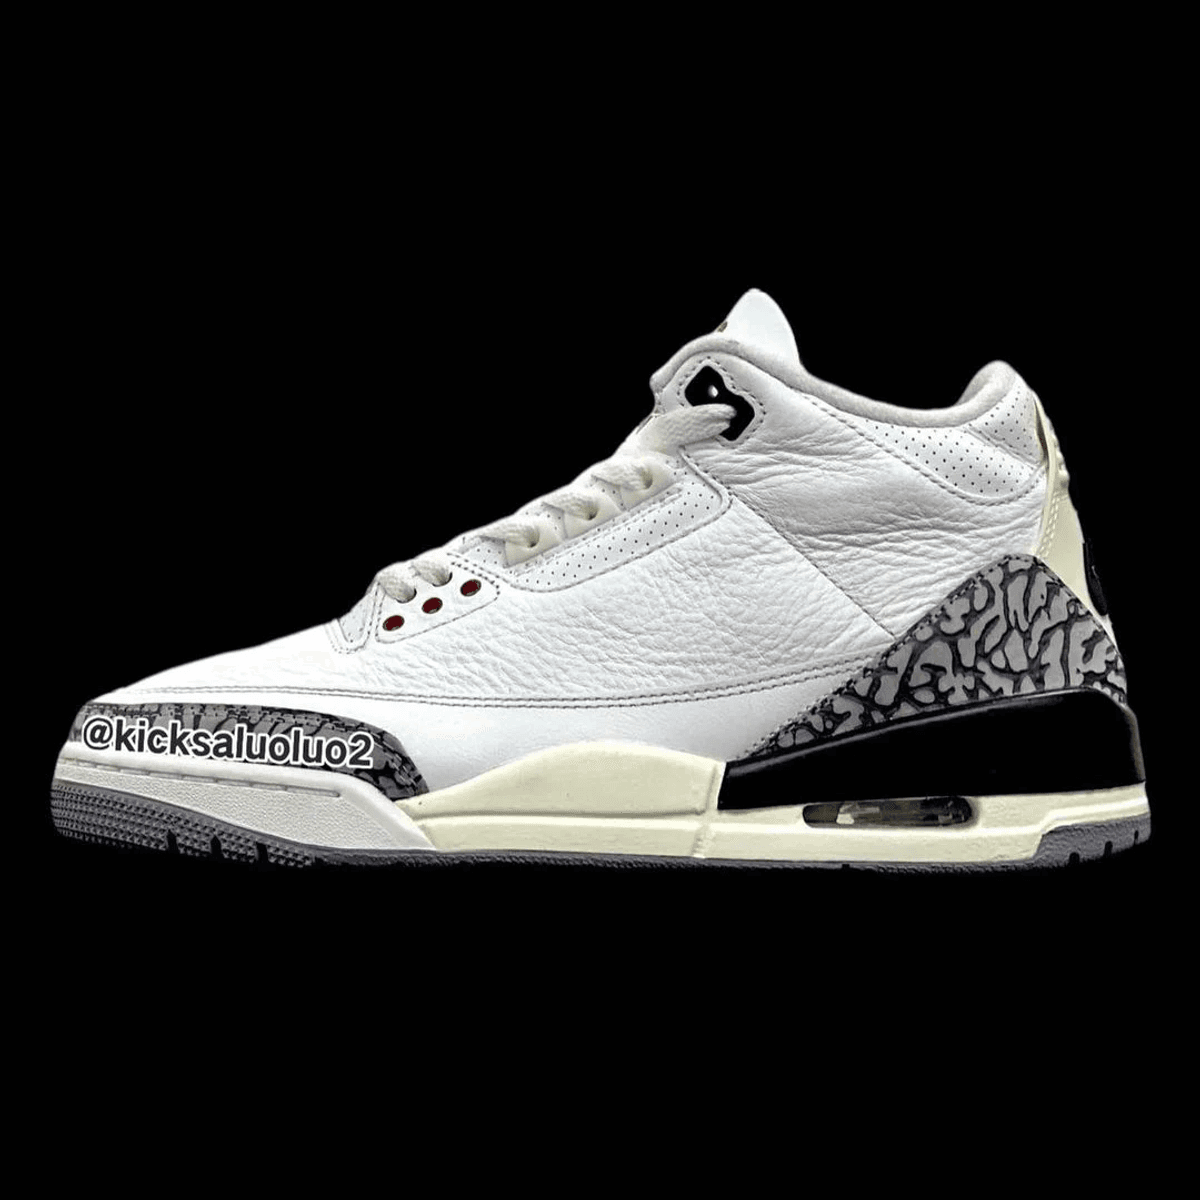 The White Cement Colorway Will Make Its Way Onto The Air Jordan 3 In 2023